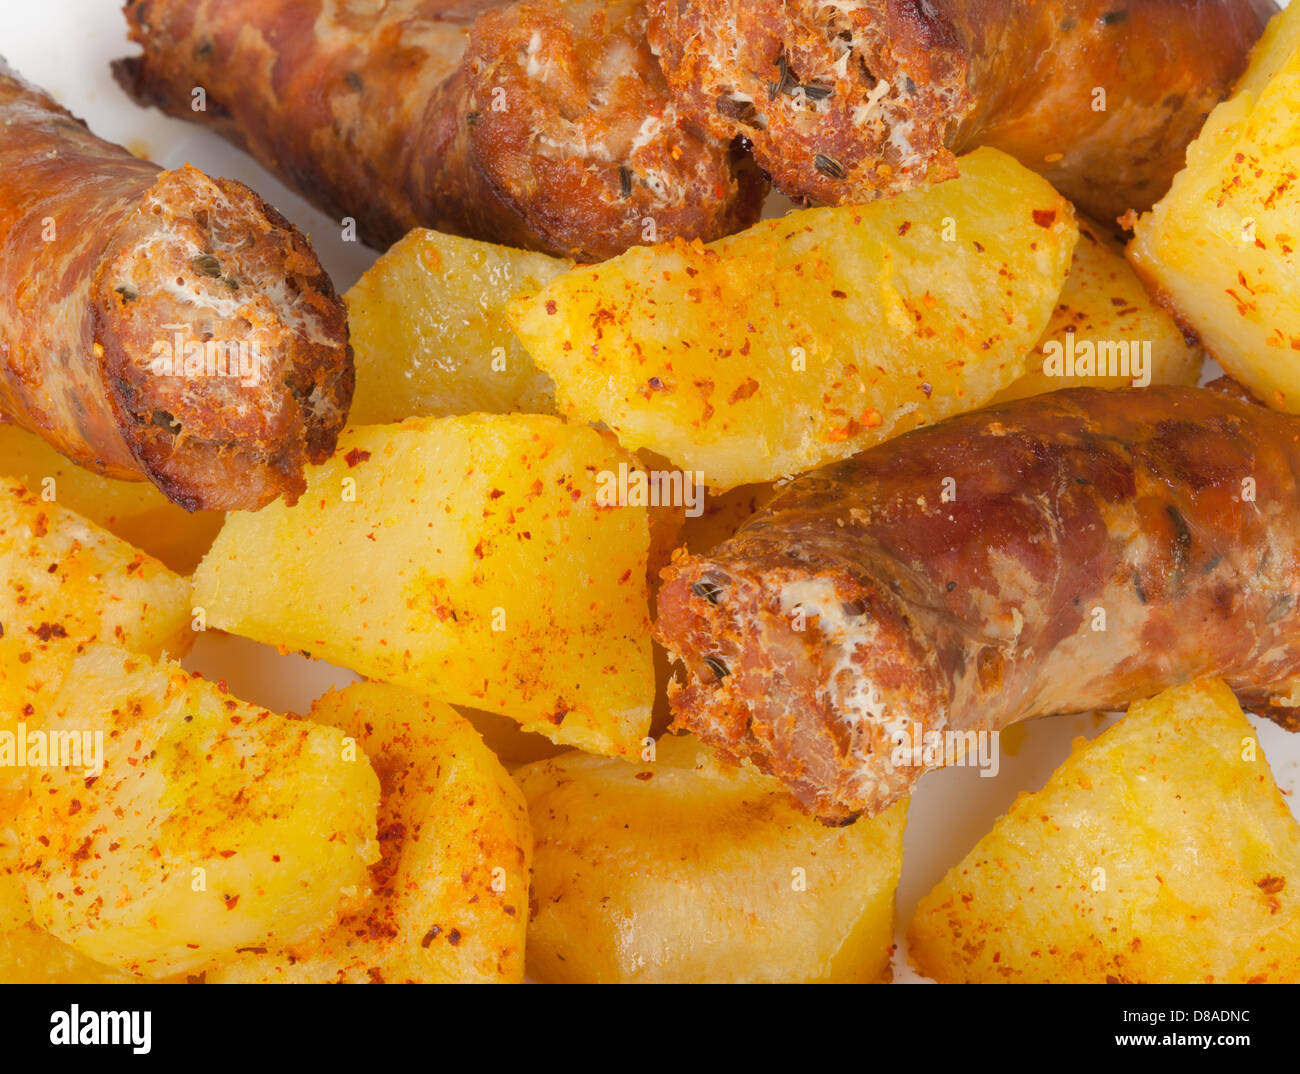 Chicken nuggets images - stock - photography and Page hi-res food Alamy 36 fast